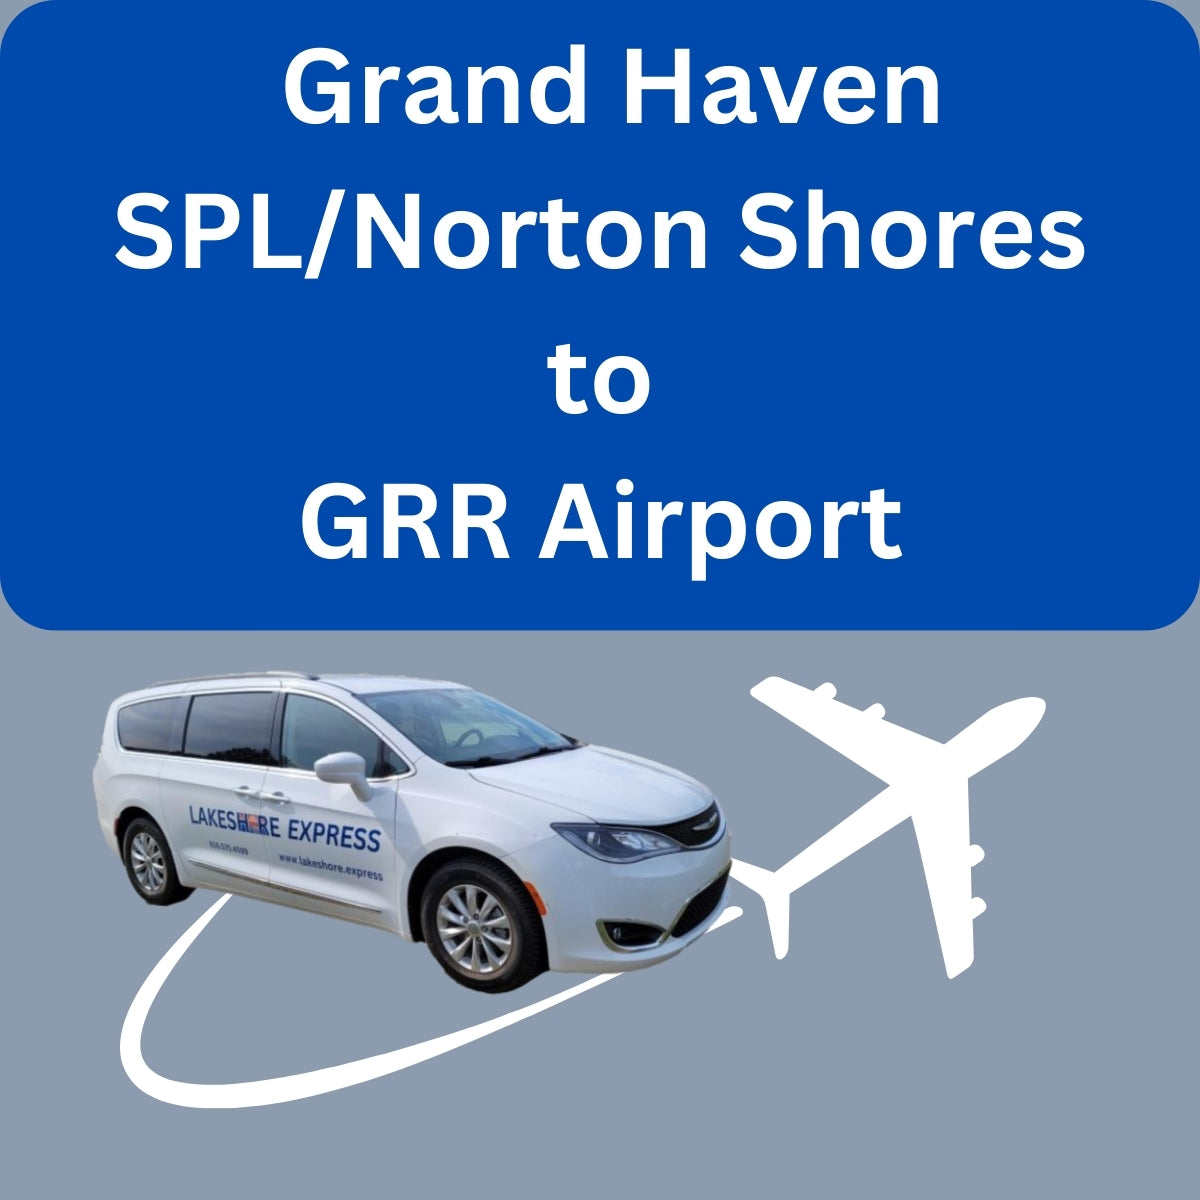 Grand Haven/Spring Lake/Norton Shores to GRR Airport - $79.95 per entire party